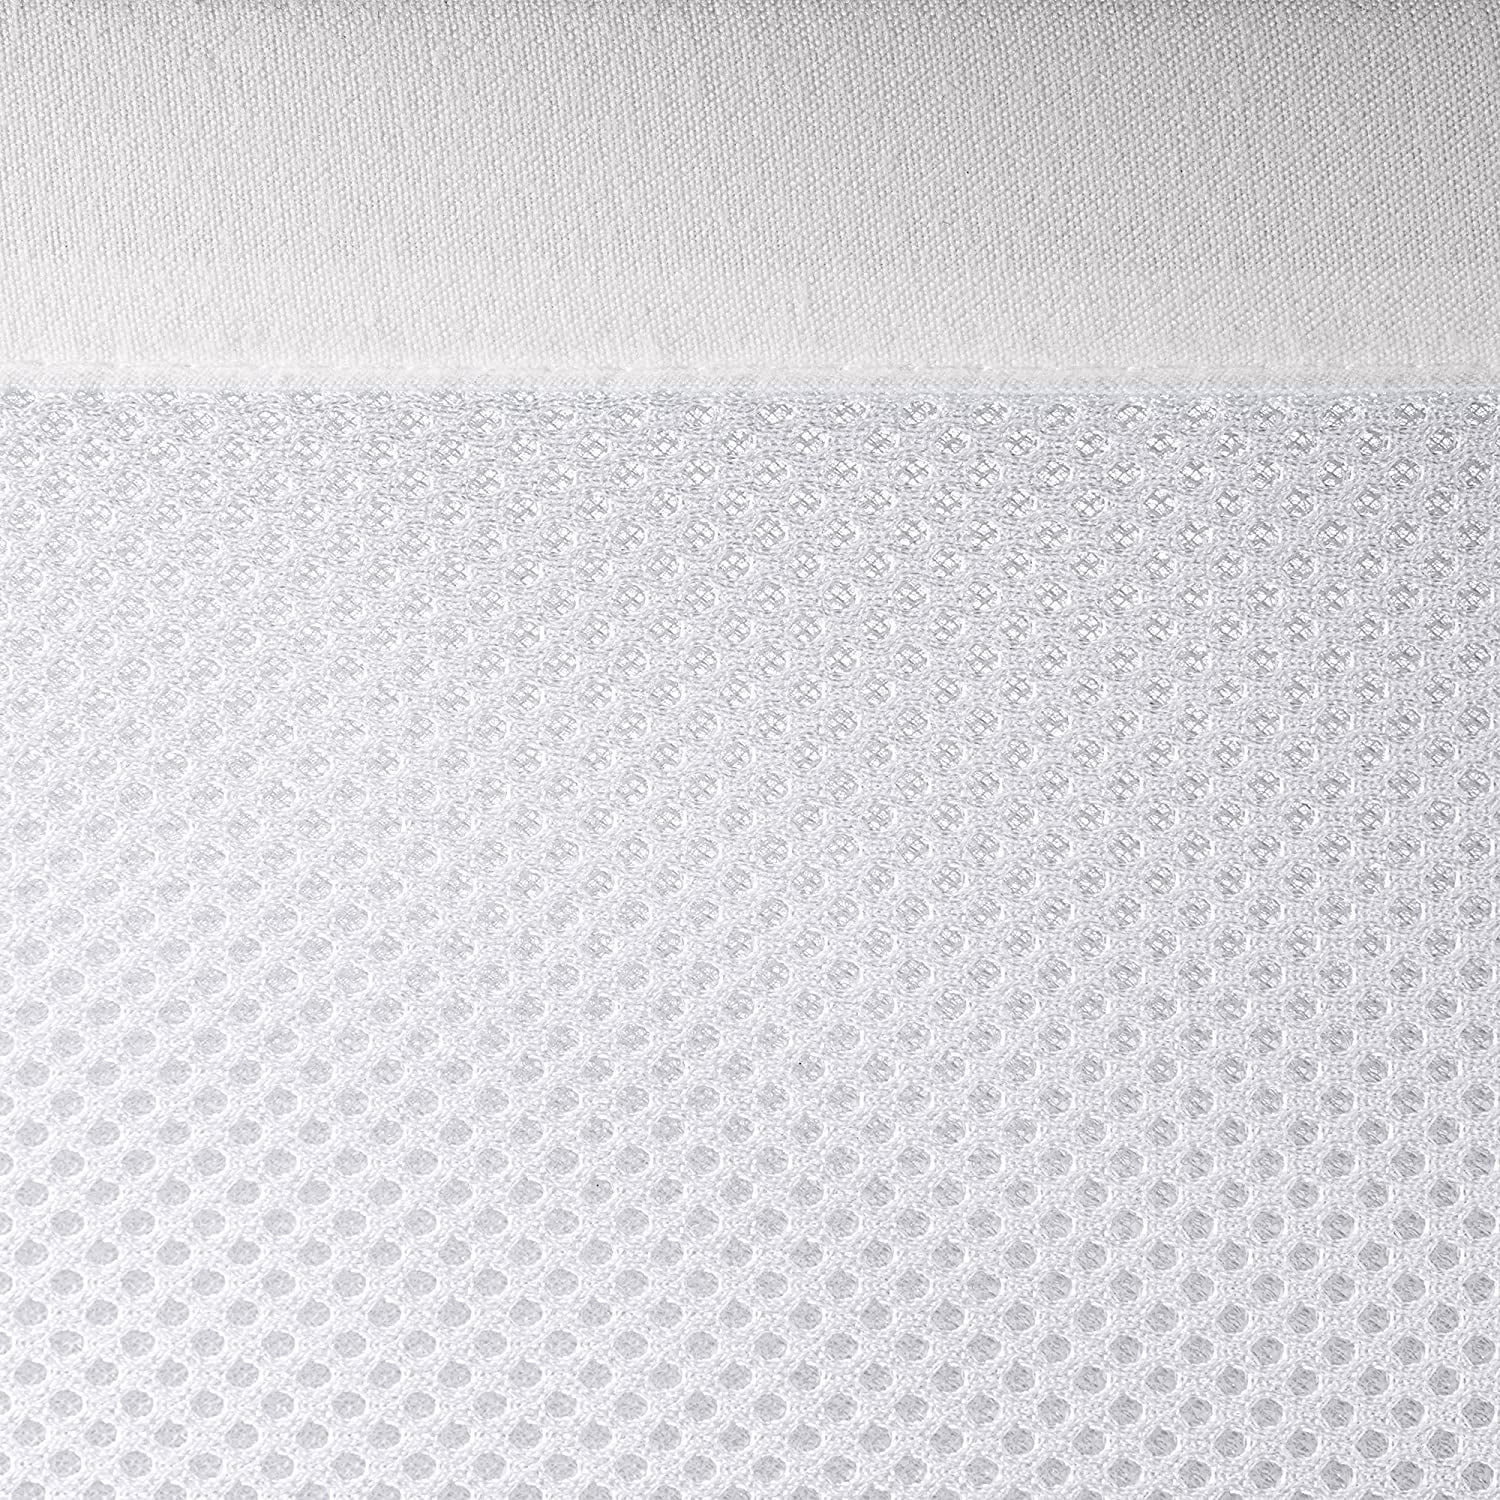 White and Gray Seersucker Trim BreathableBaby Classic Breathable Mesh Crib Liner 